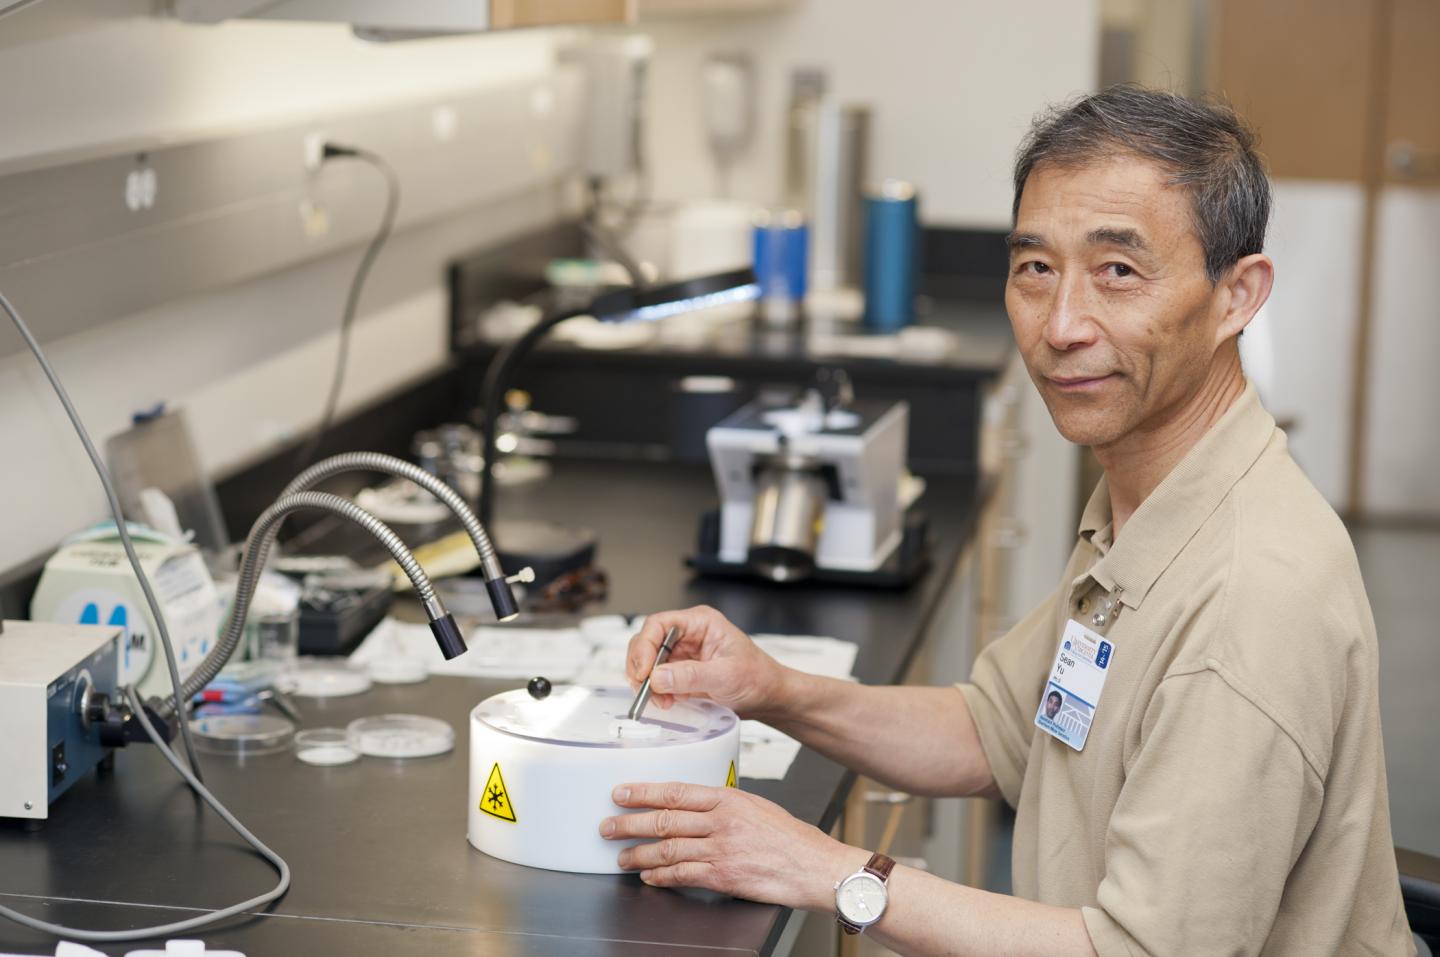 Xiong (Sean) Yu, Ph.D., demonstrates a step in the process of prepping a sample for analysis. image: Kay Taylor | University of Virginia Health System